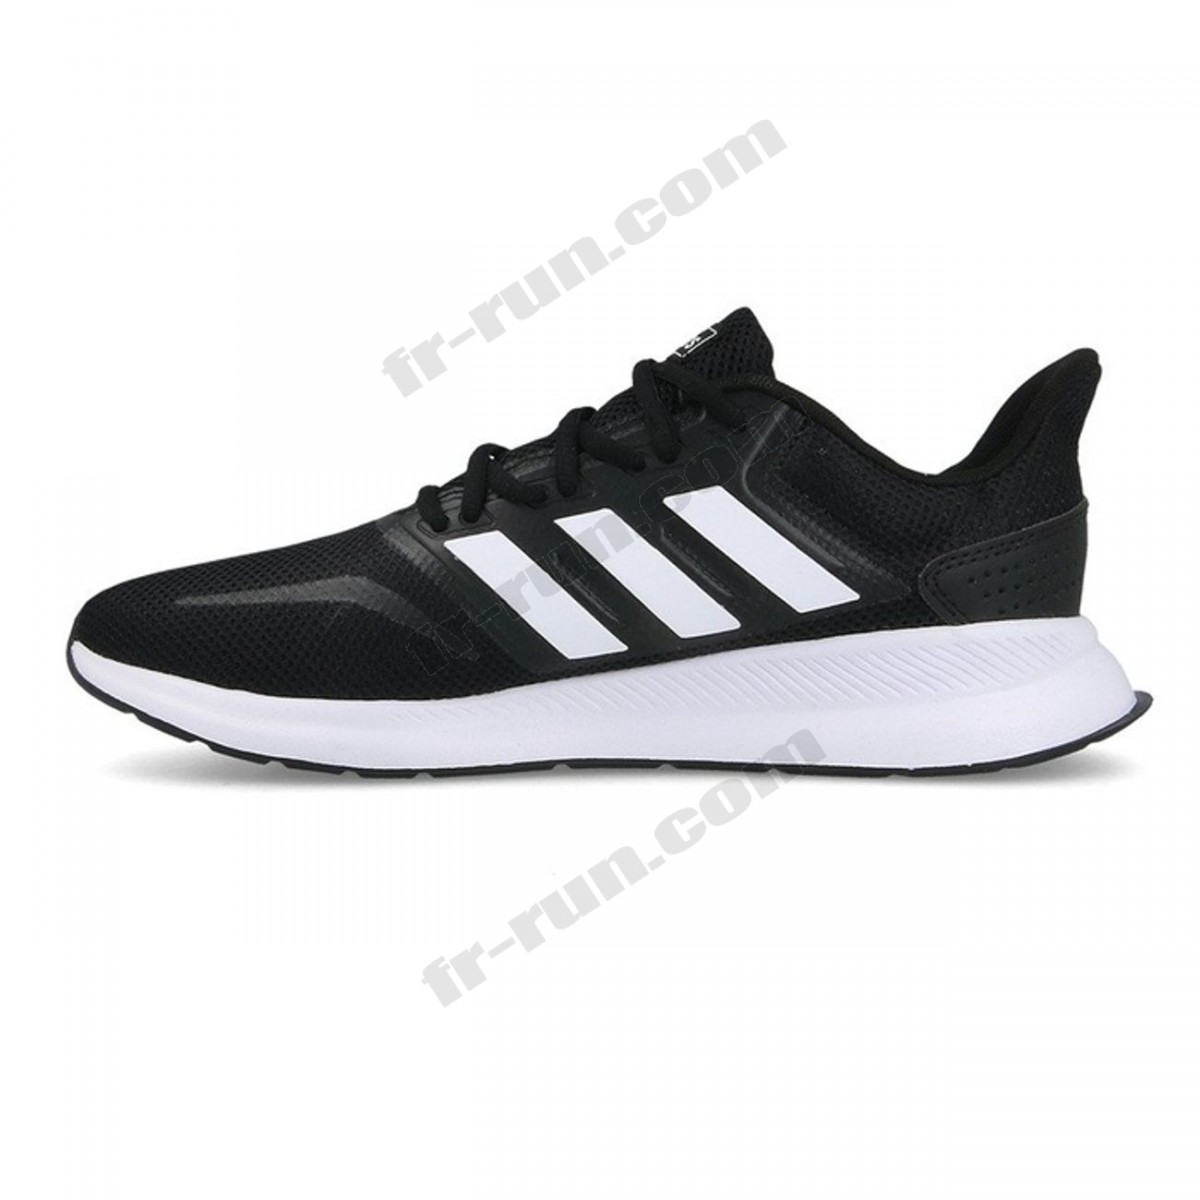 Adidas/CHAUSSURES BASSES running homme ADIDAS RUNFALCON, NOIR √ Nouveau style √ Soldes - Adidas/CHAUSSURES BASSES running homme ADIDAS RUNFALCON, NOIR √ Nouveau style √ Soldes